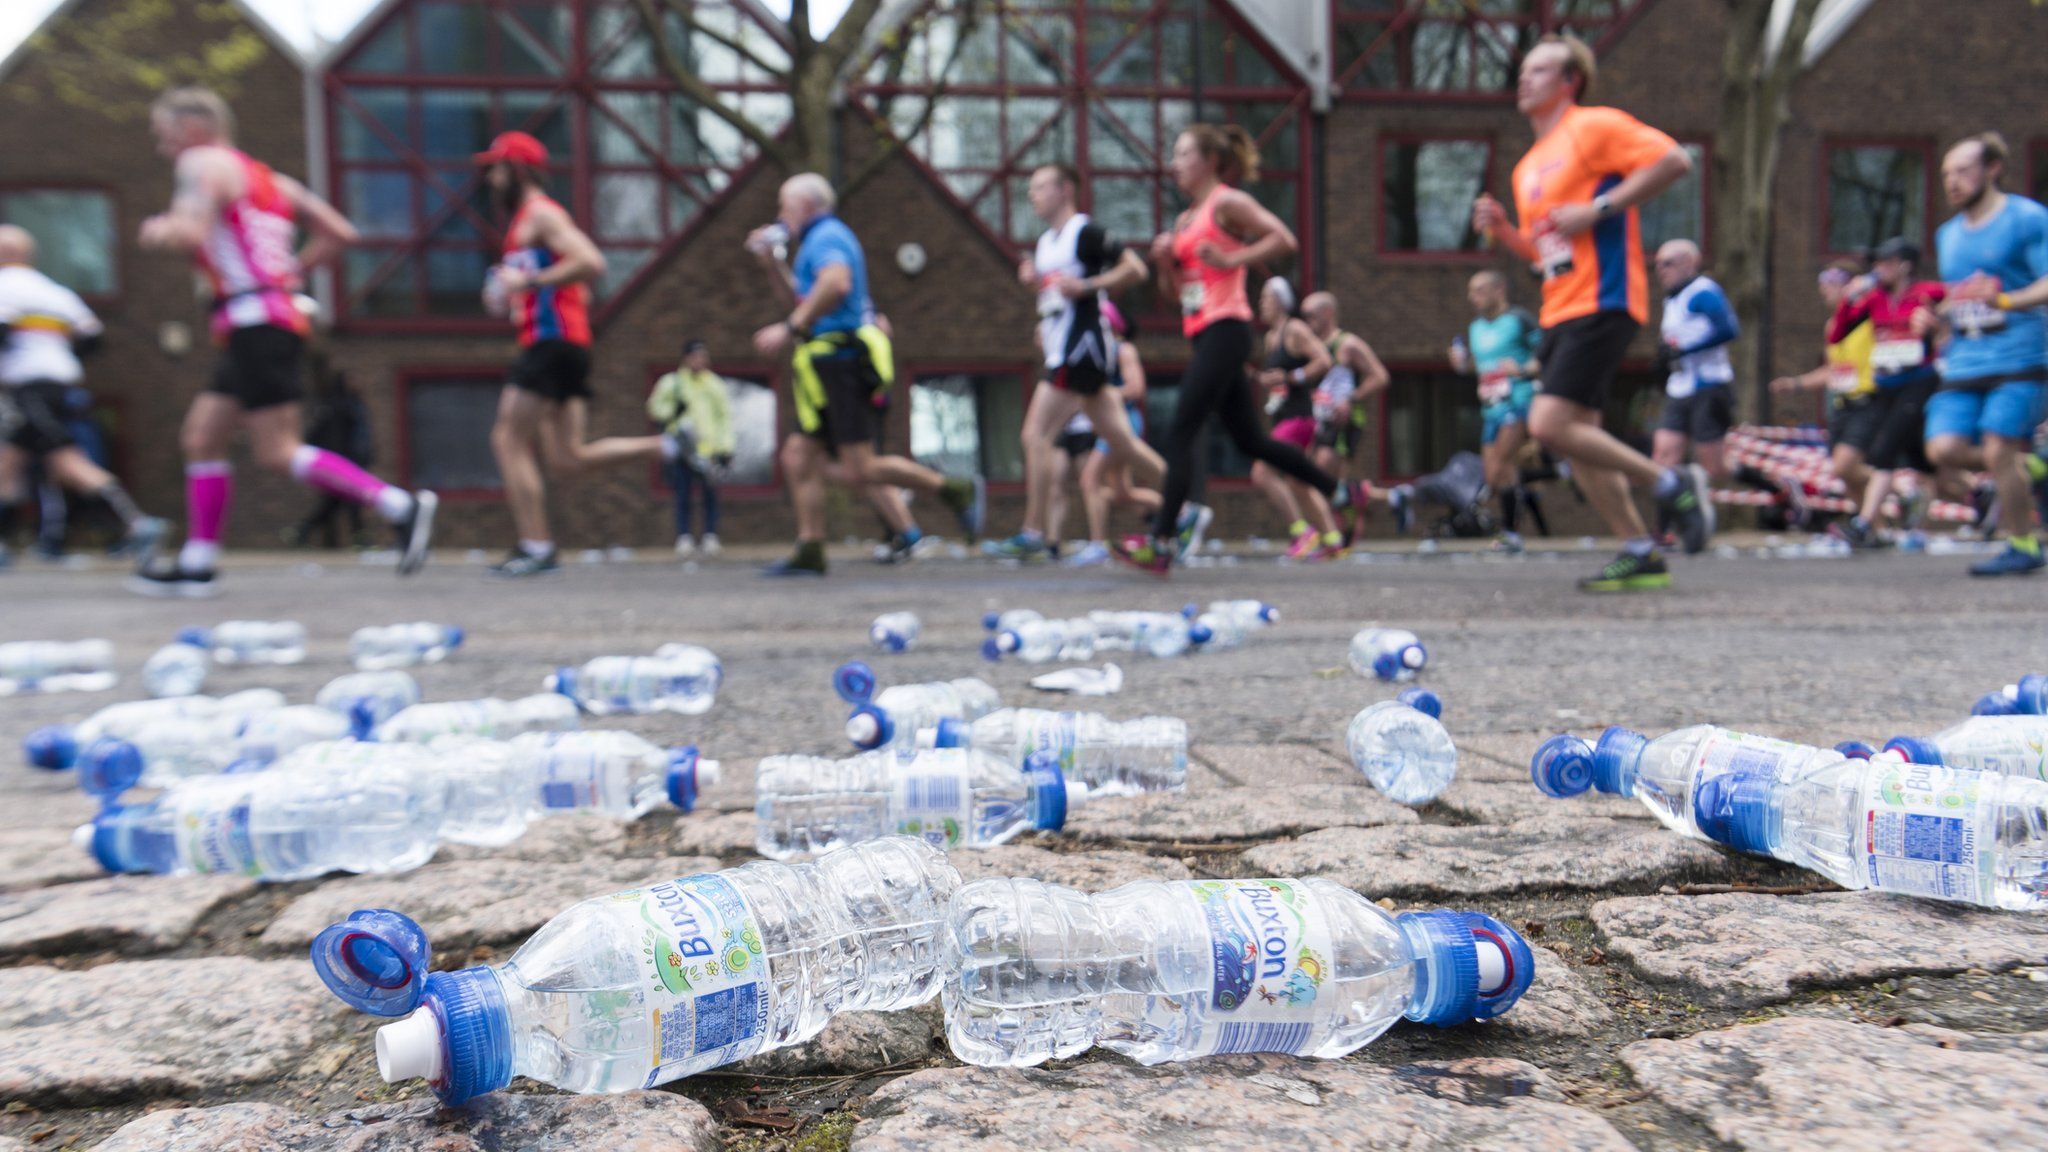 Runners run past water bottles as they take part in the 2016 London Marathon in London